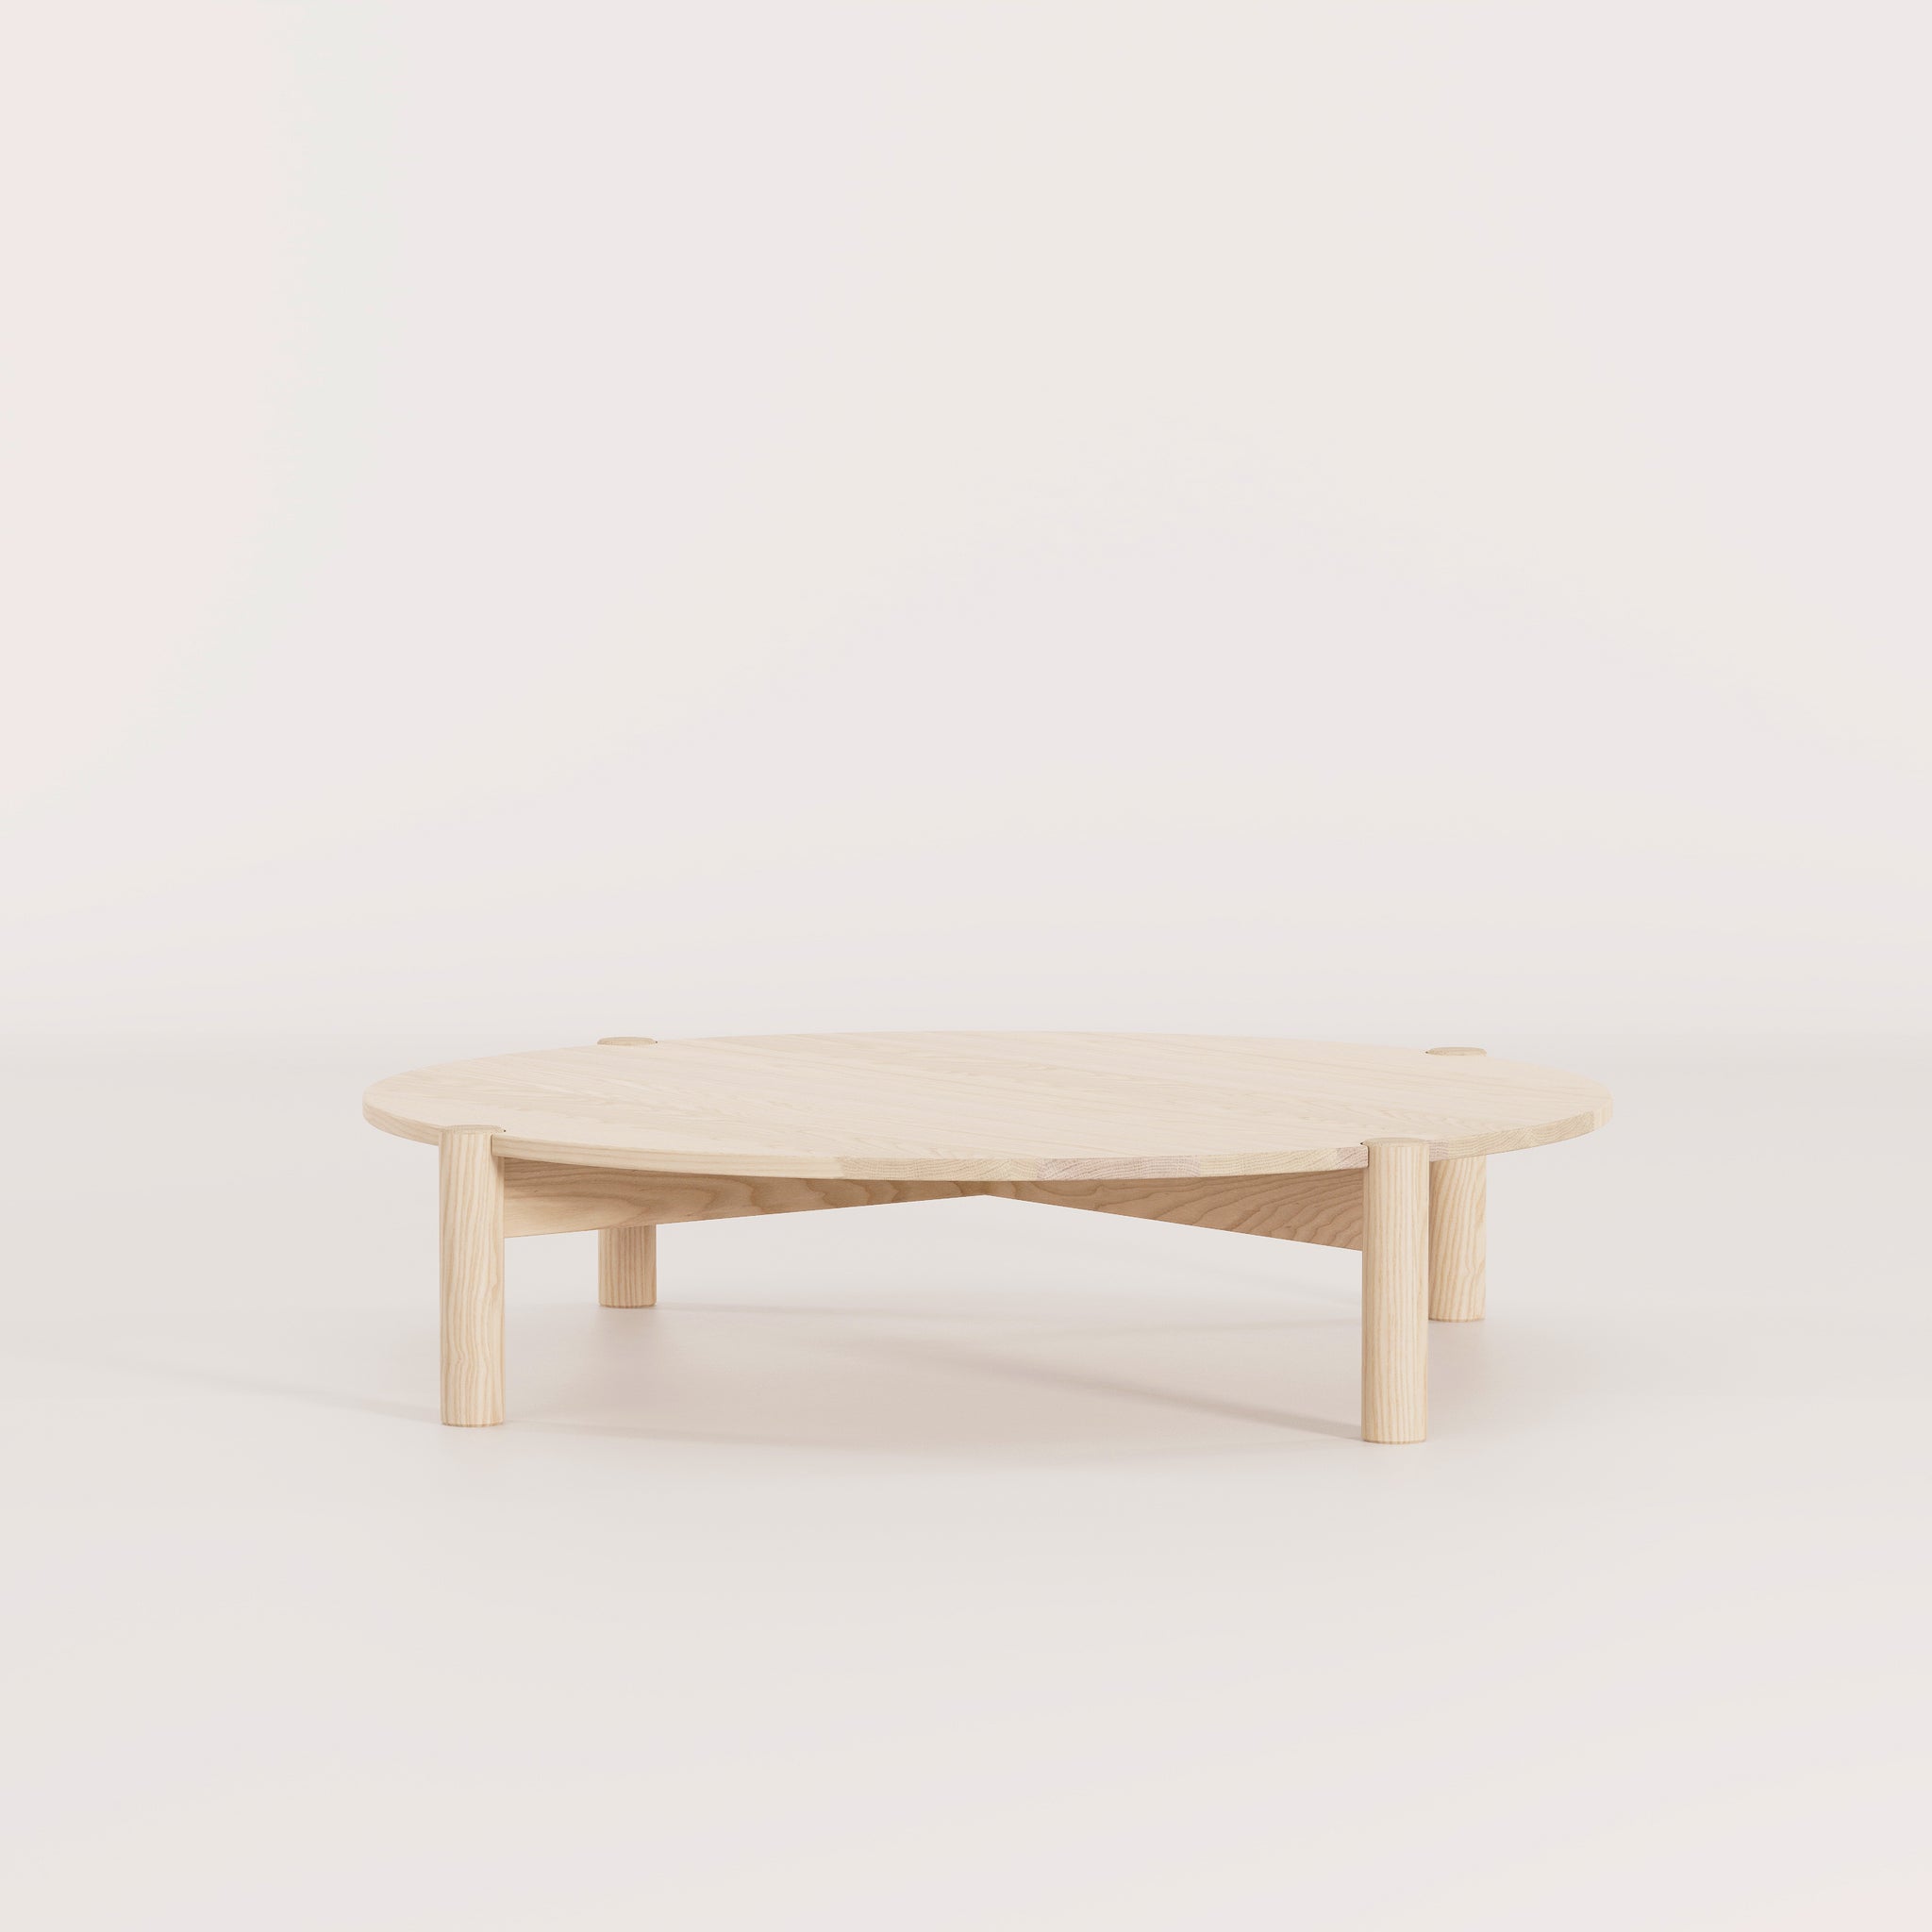 A modern, Australian made, timber coffee table by Mast Furniture.